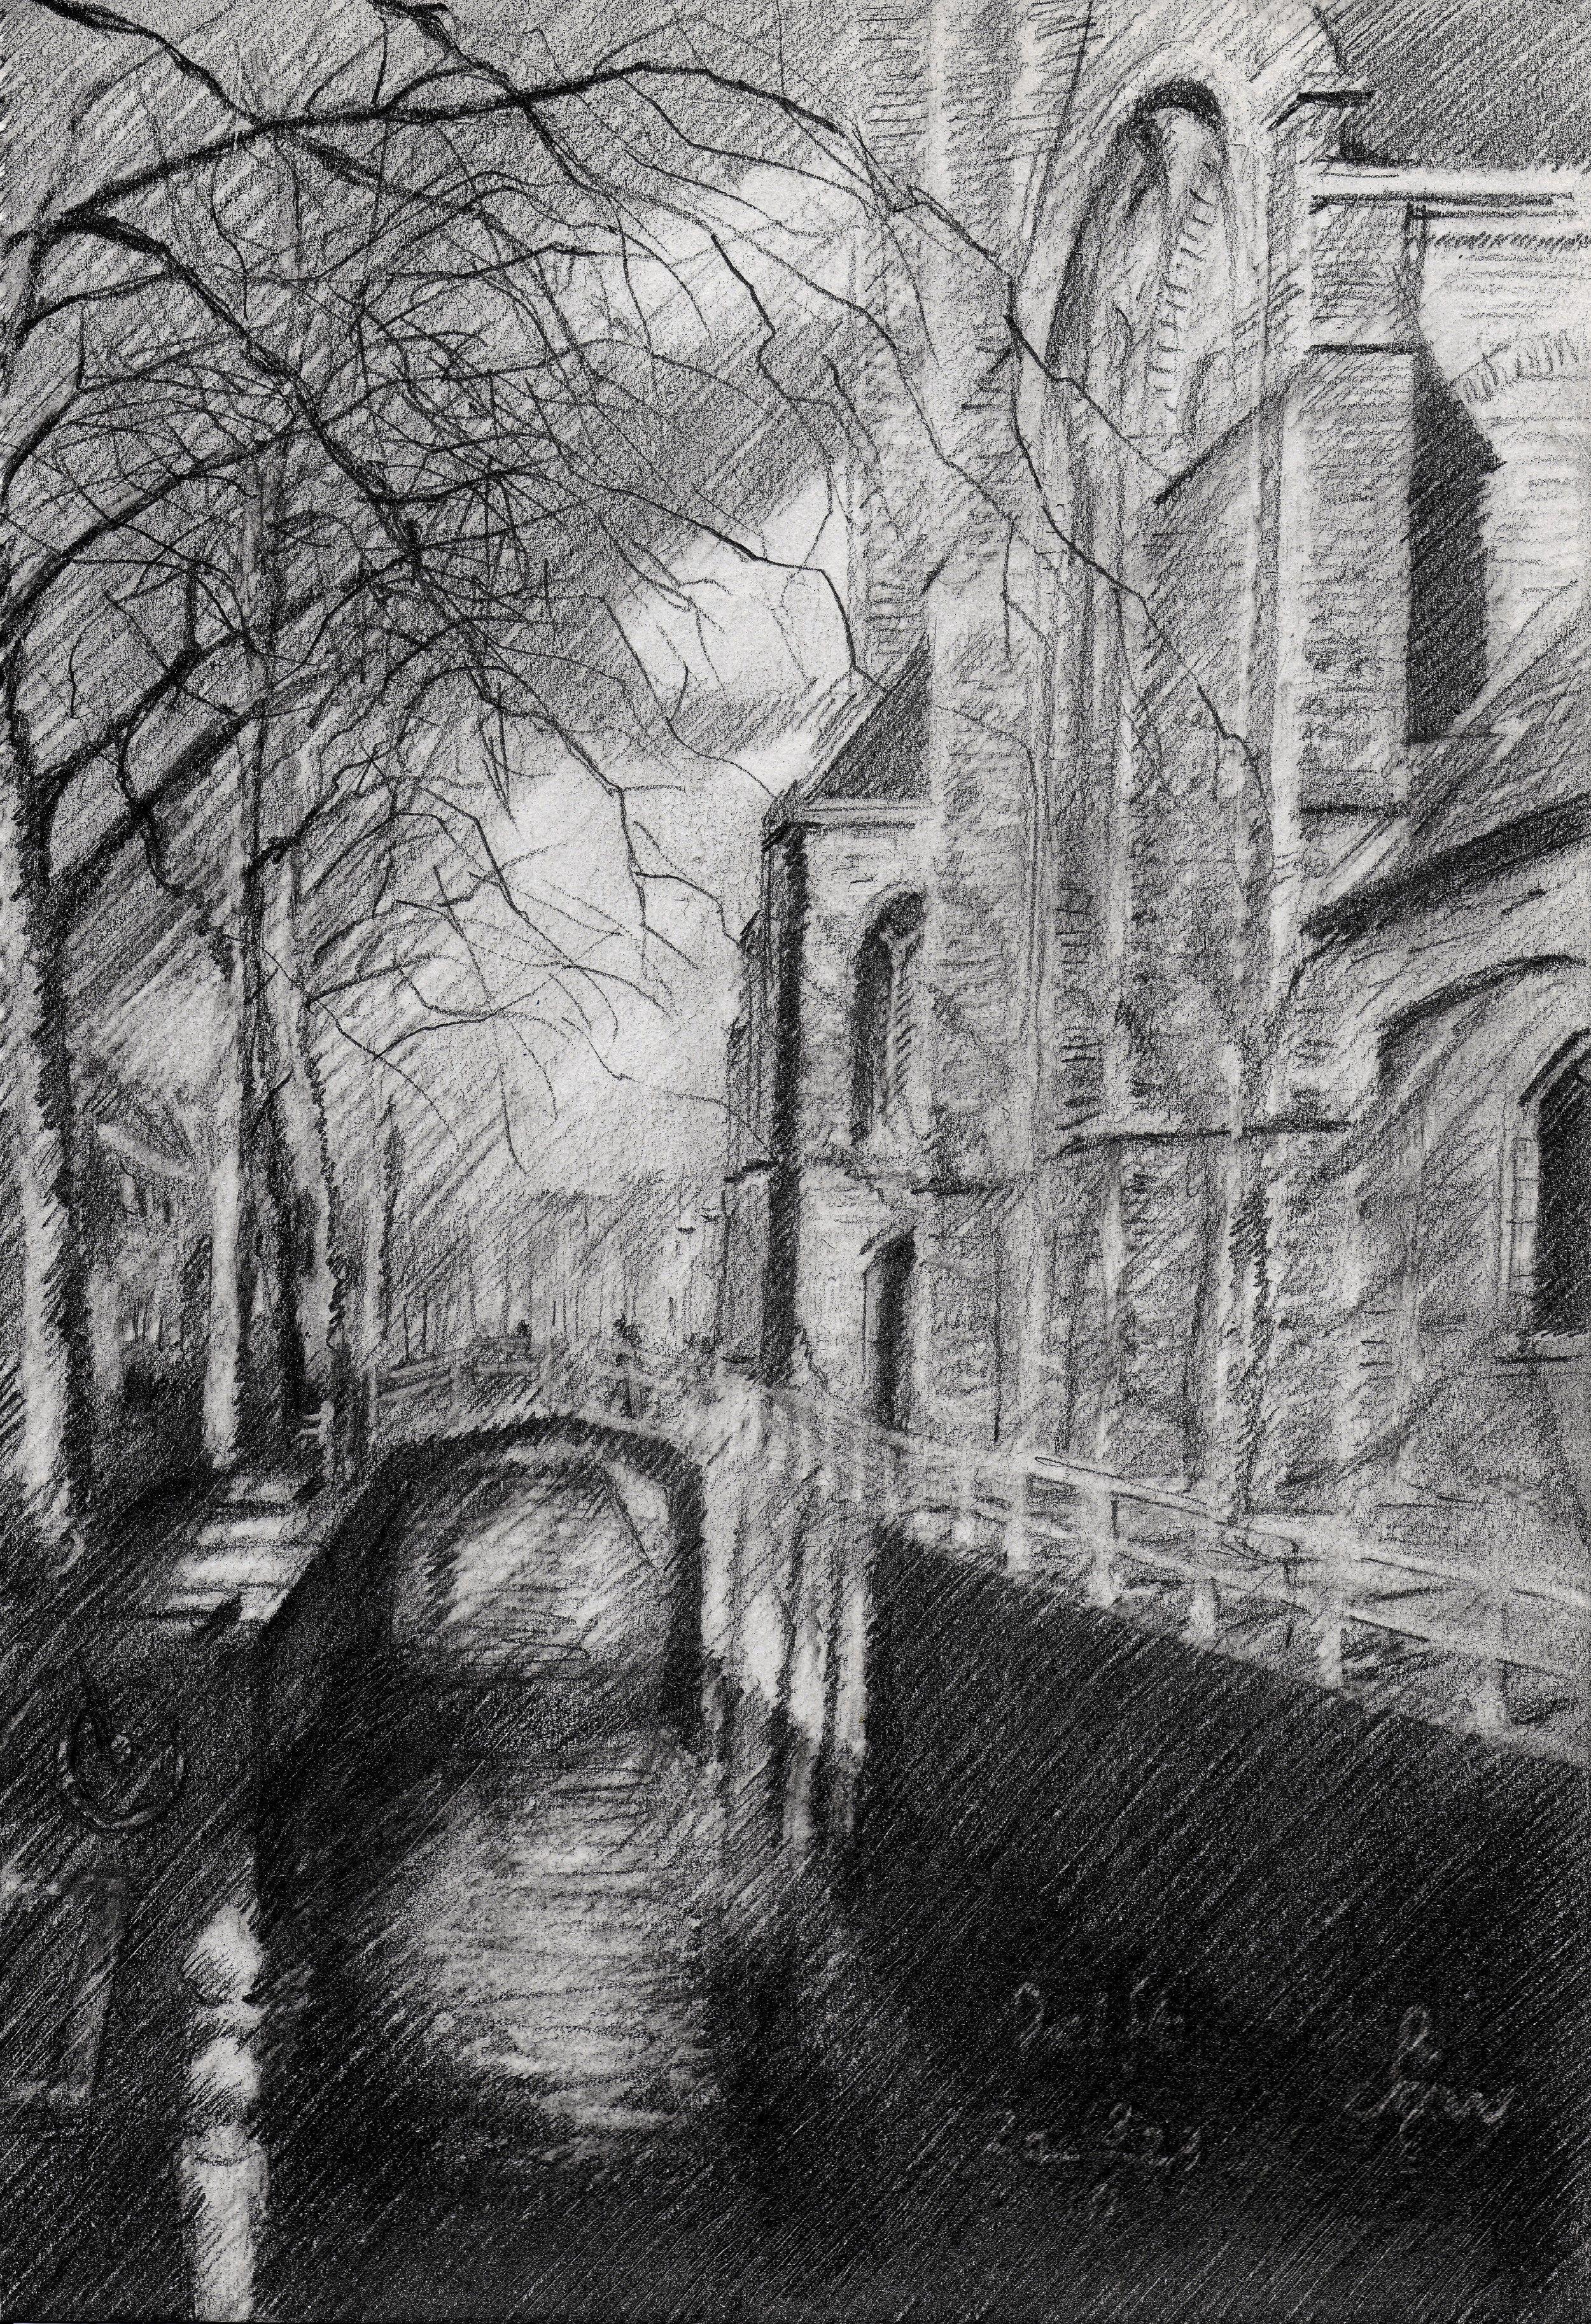 Delft â€“ 19-03-23, Drawing, Pencil/Colored Pencil on Paper - Art by Corne Akkers